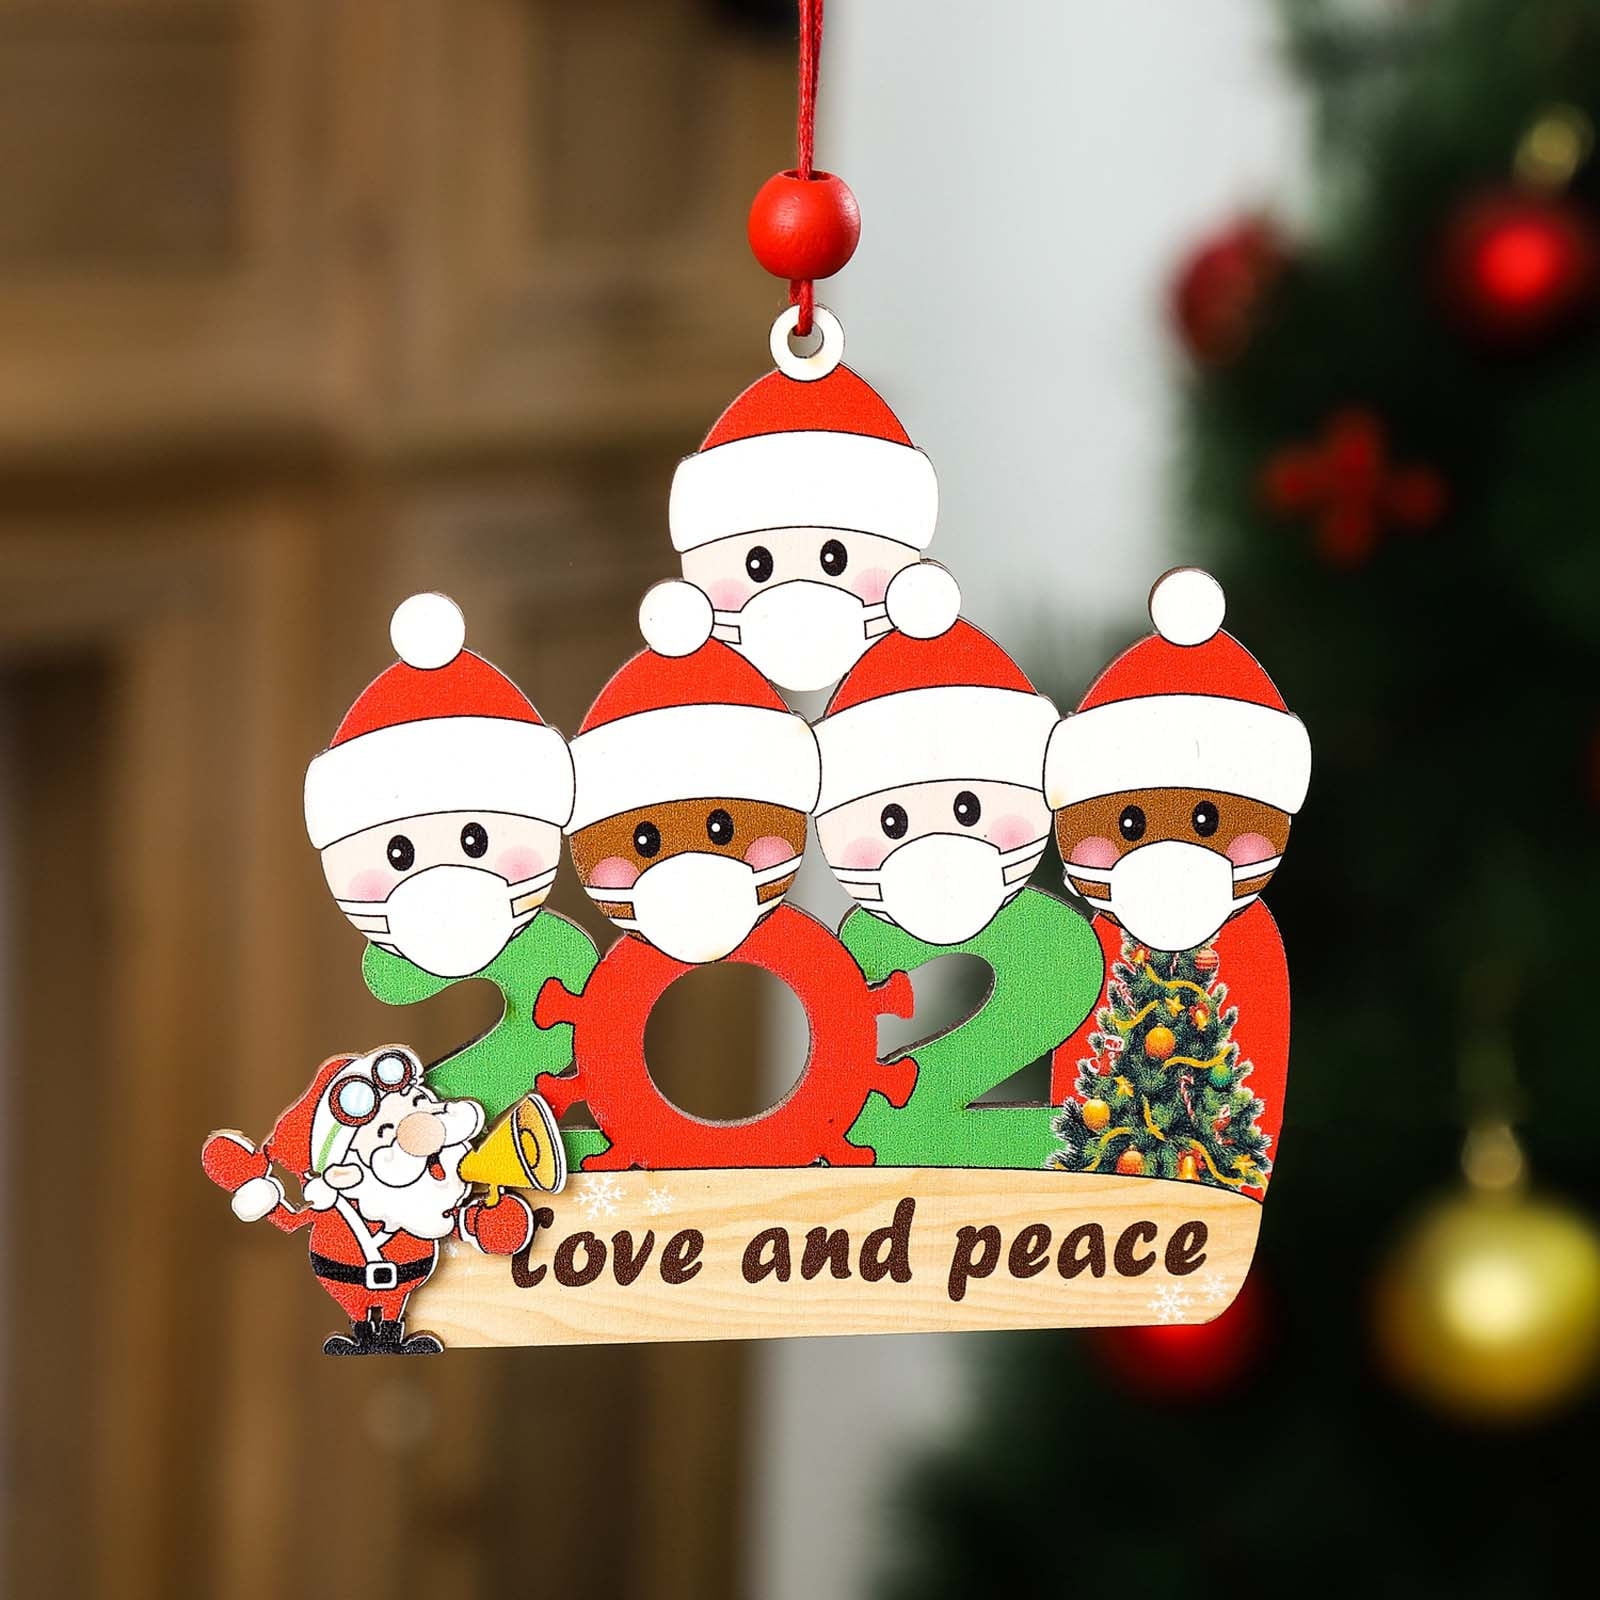 1x2020 Merry Christmas Hanging Ornament Family Personalized Ornaments wood Decor 